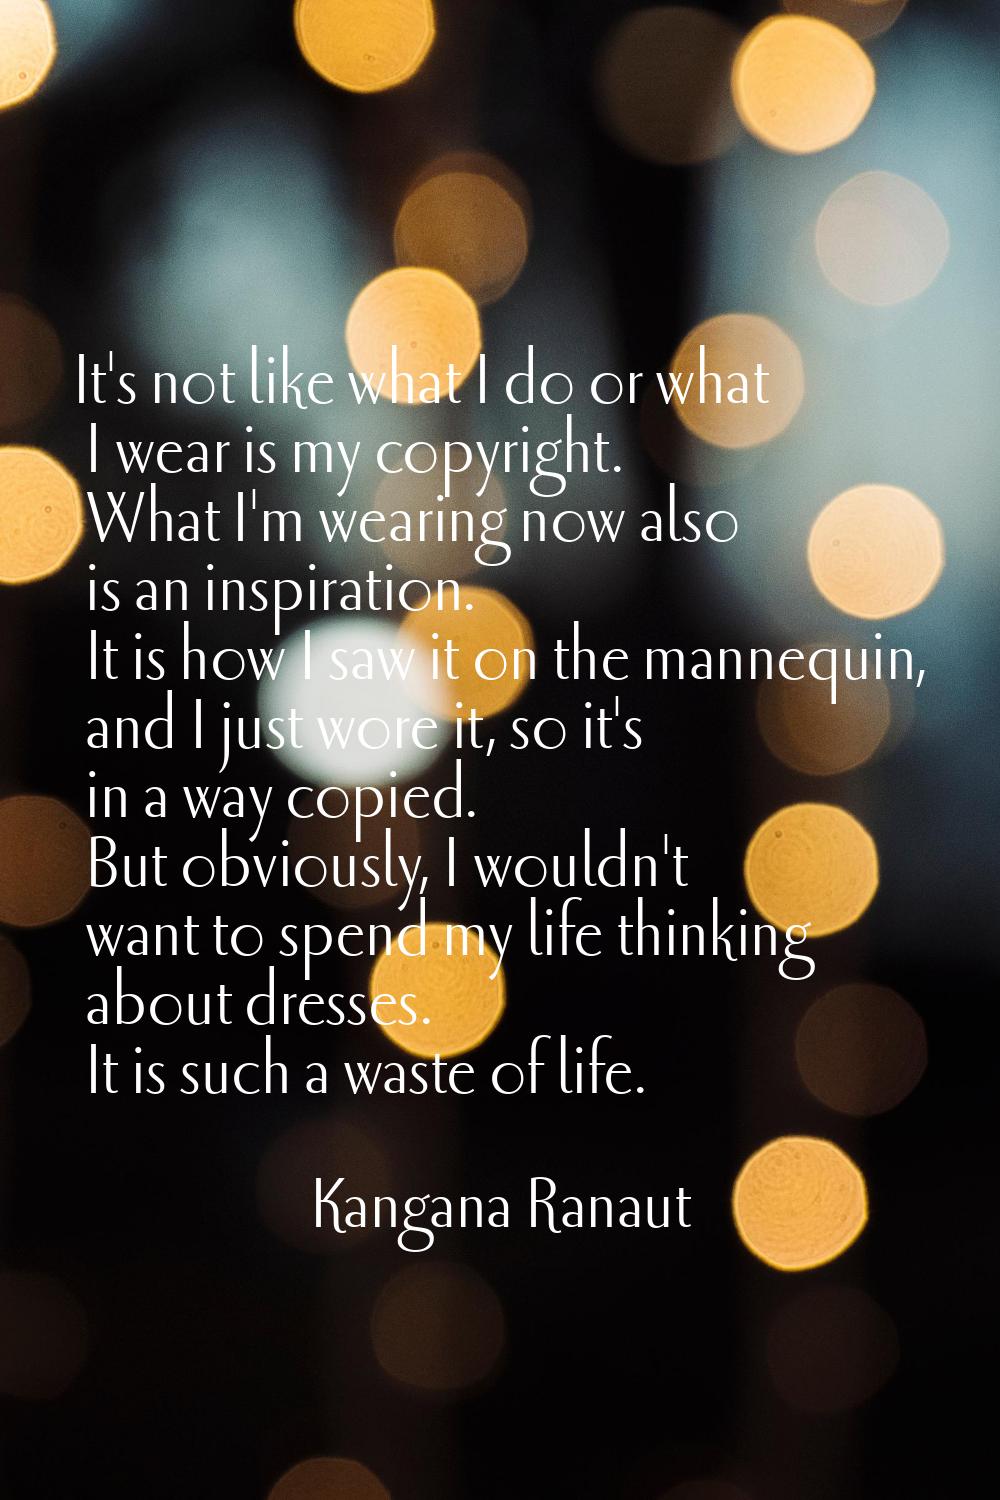 It's not like what I do or what I wear is my copyright. What I'm wearing now also is an inspiration